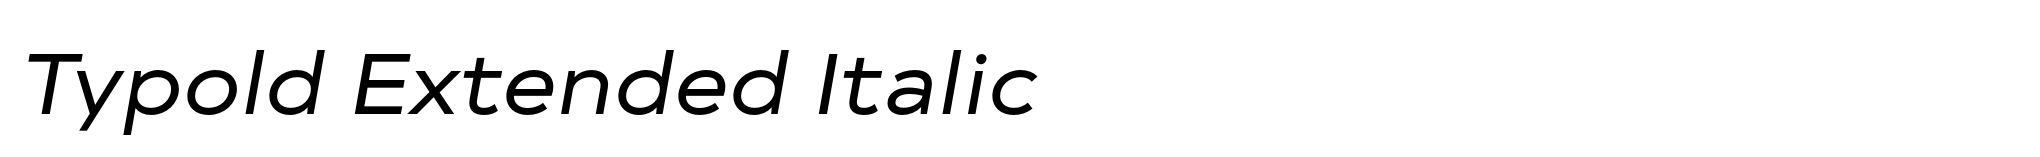 Typold Extended Italic image